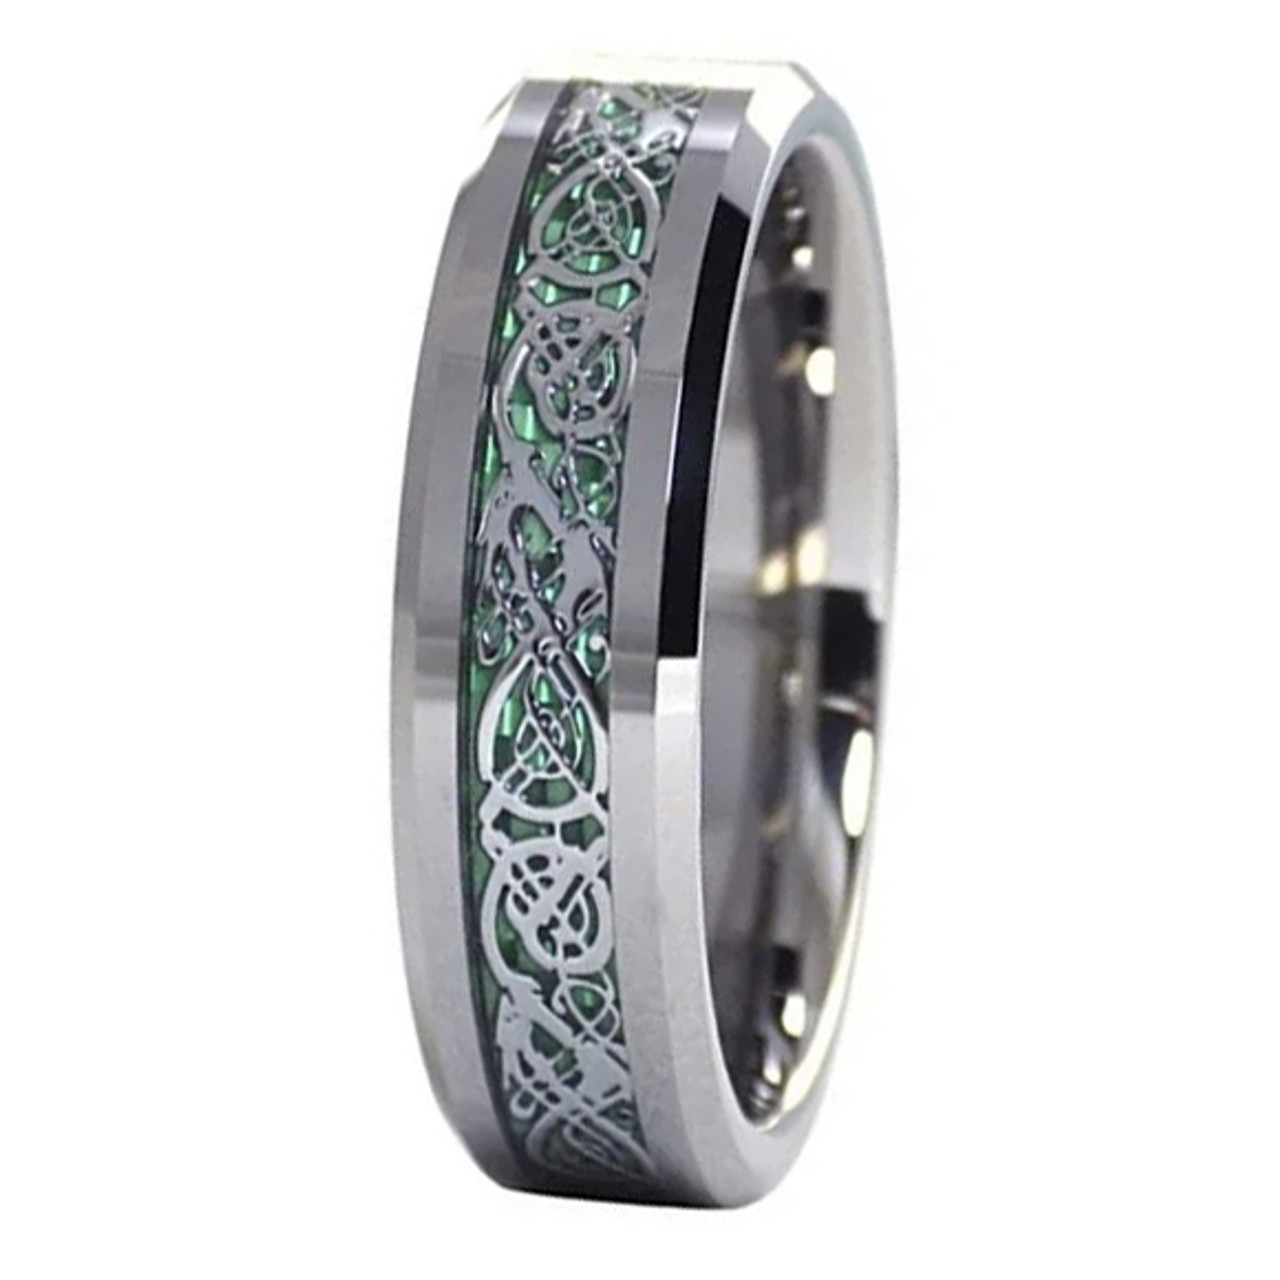 Women's Tungsten Wedding Band (6mm). Silver Celtic Wedding Band with Green Resin Inlay. Tungsten Carbide Celtic Knot Ring